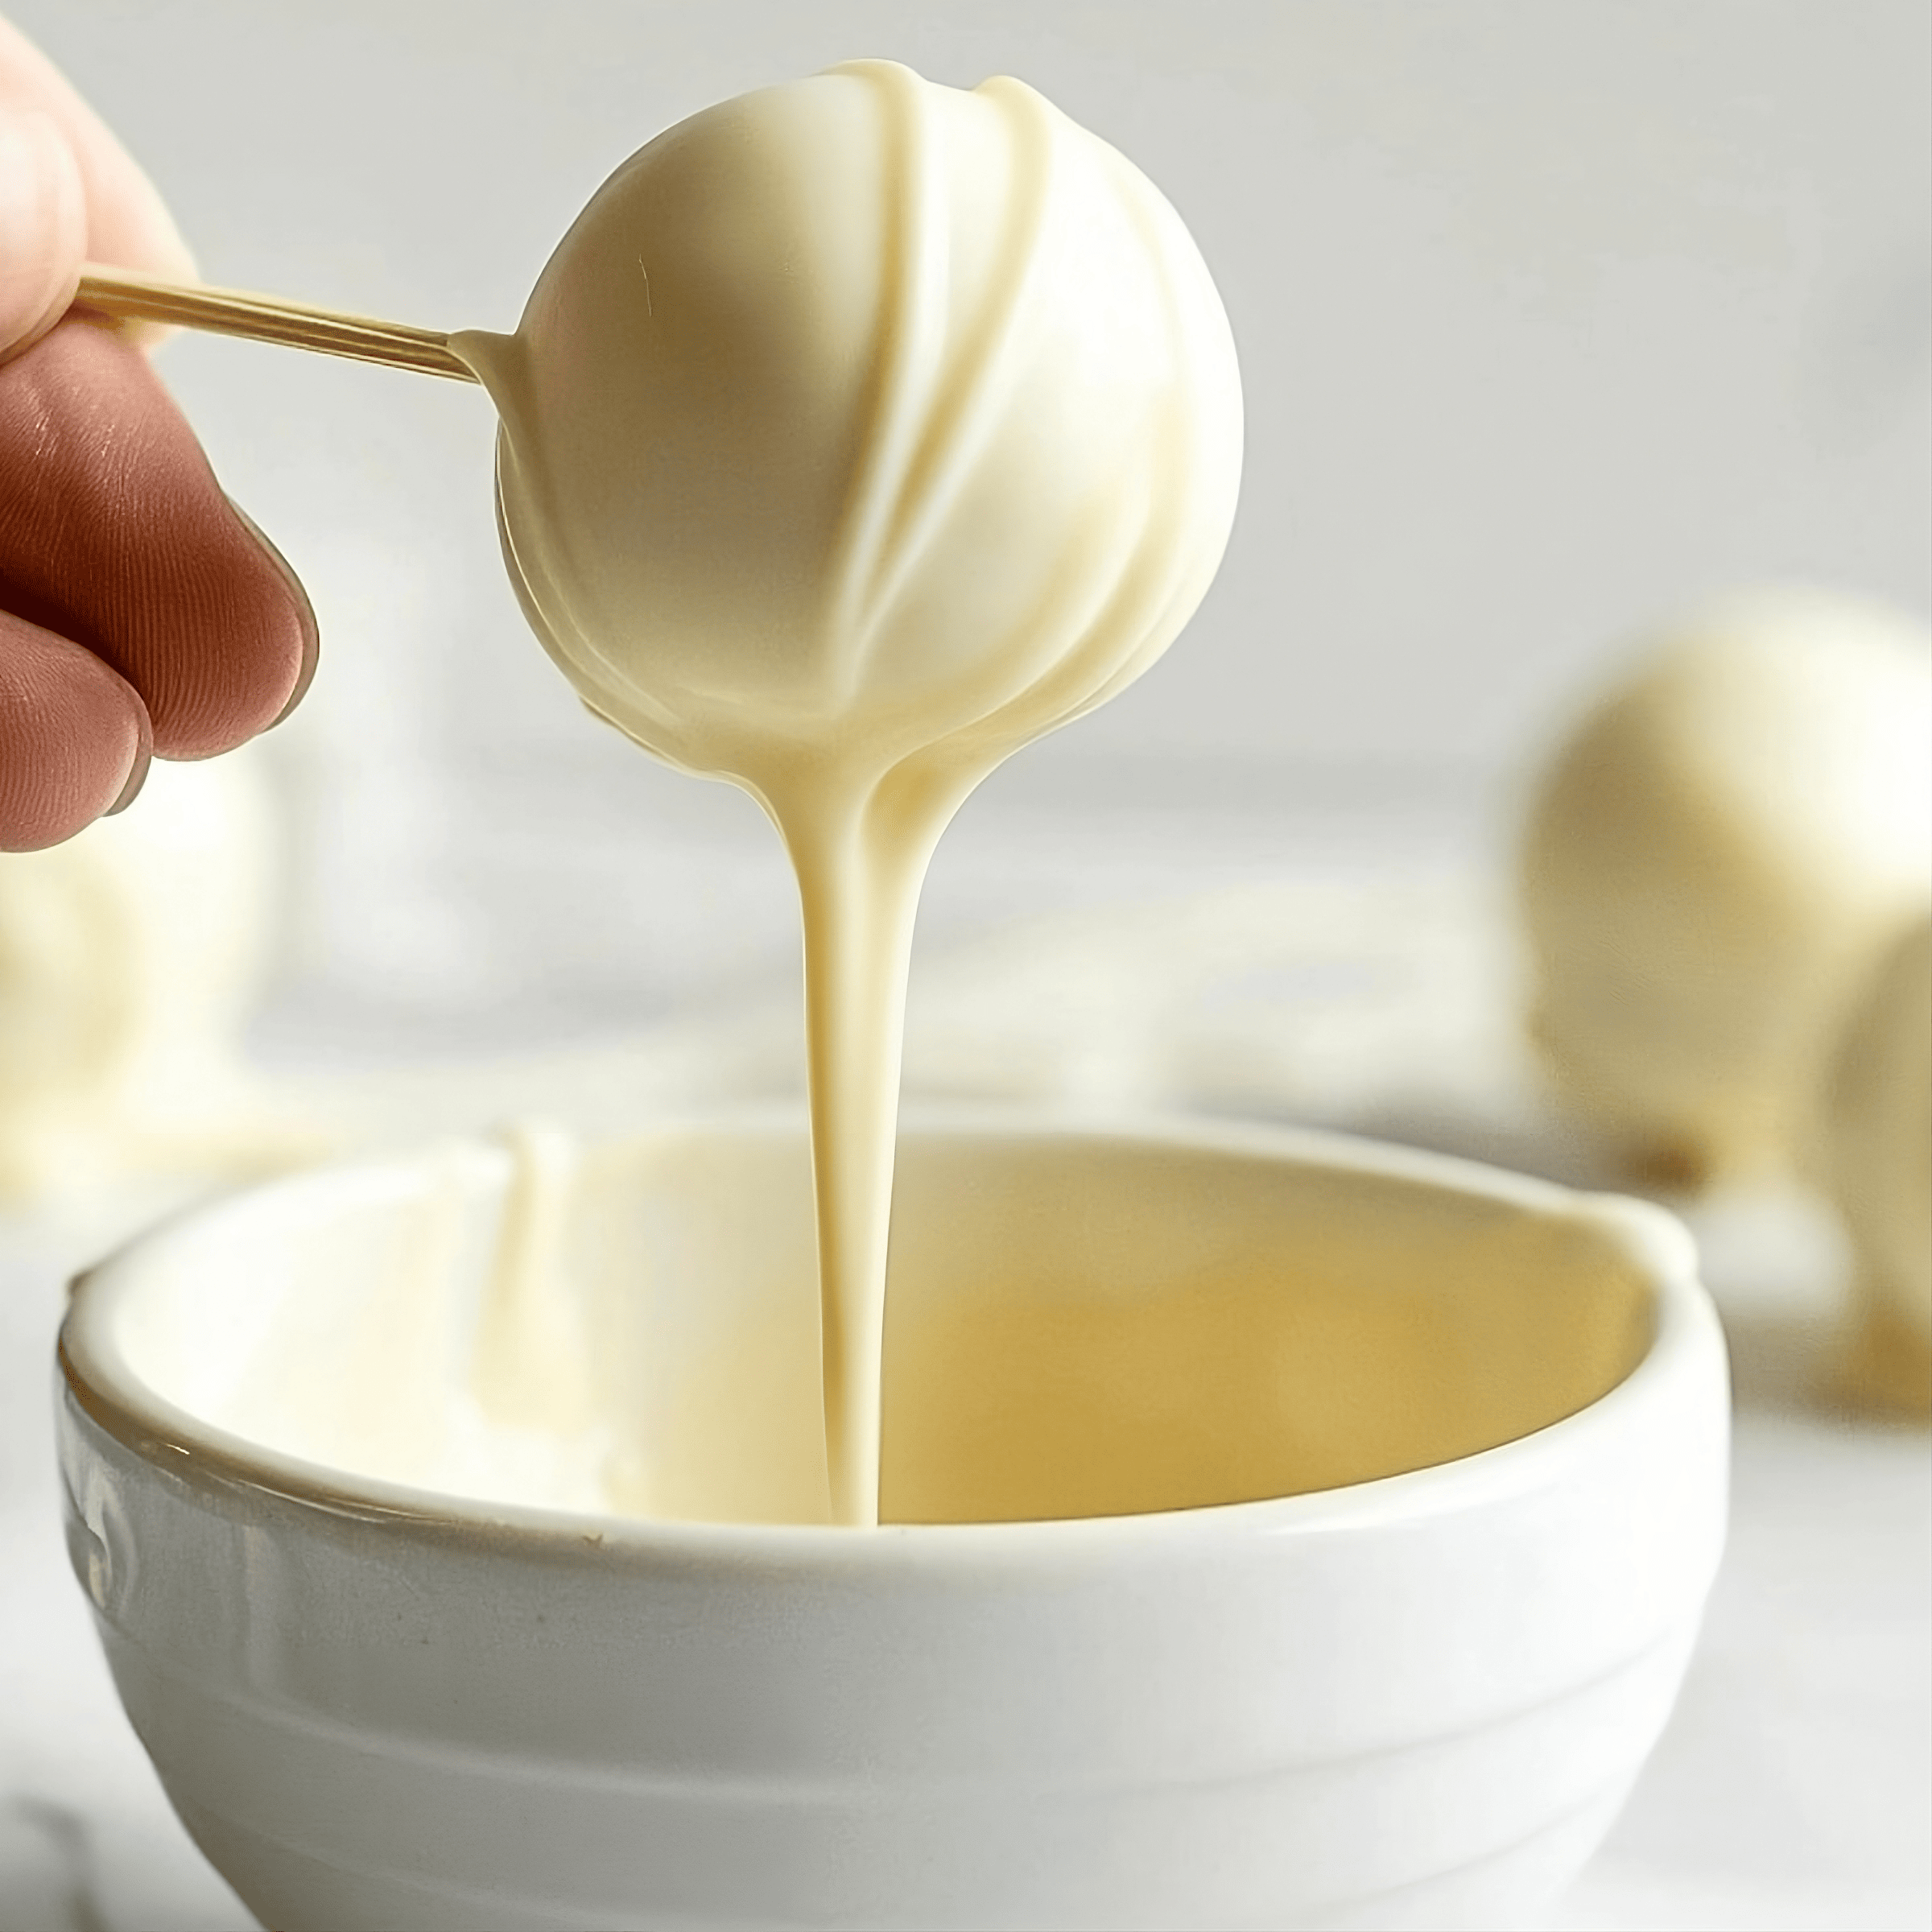 White chocolate truffle on stick dipped in a bowl of melted white chocolate.